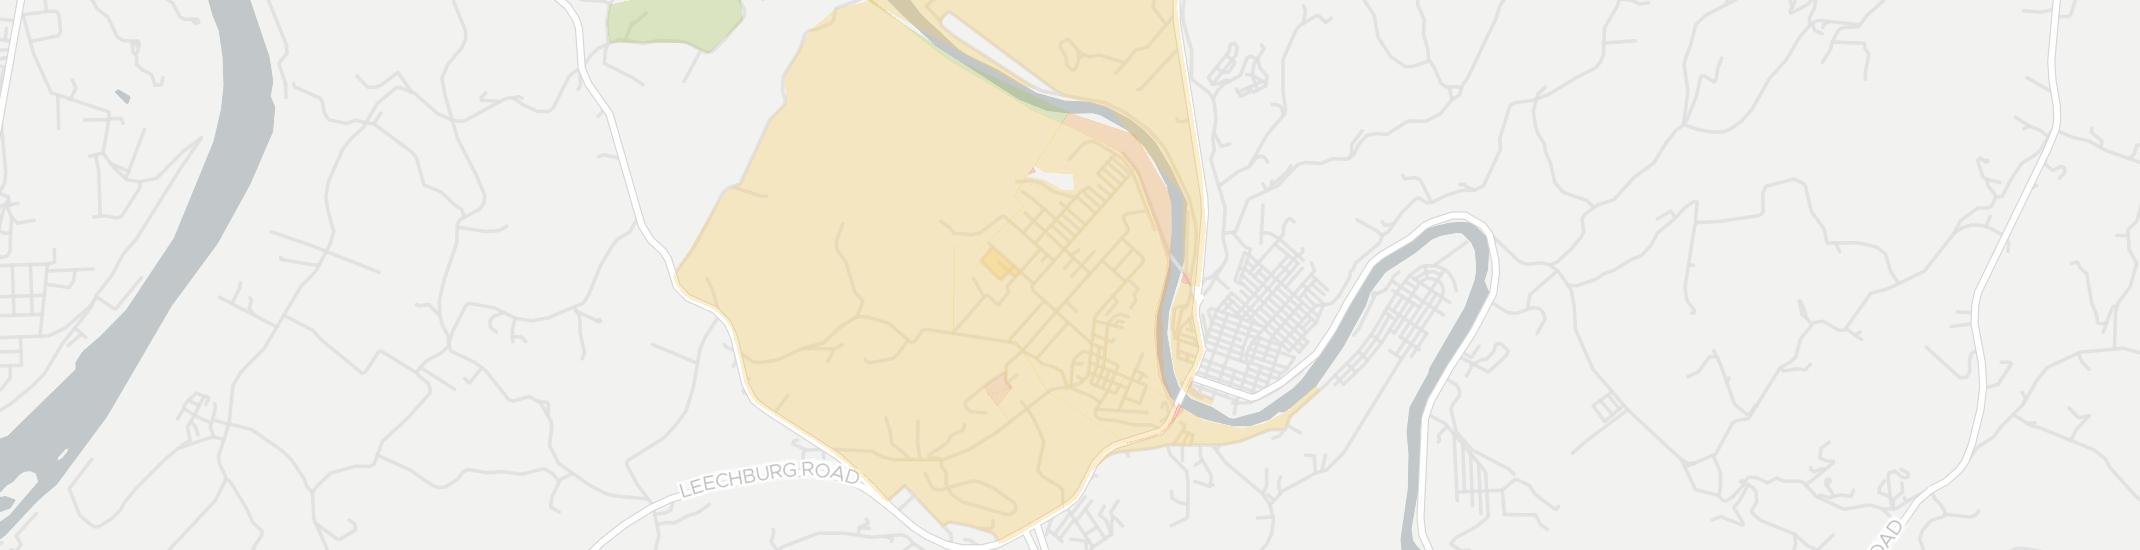 West Leechburg Internet Competition Map. Click for interactive map.